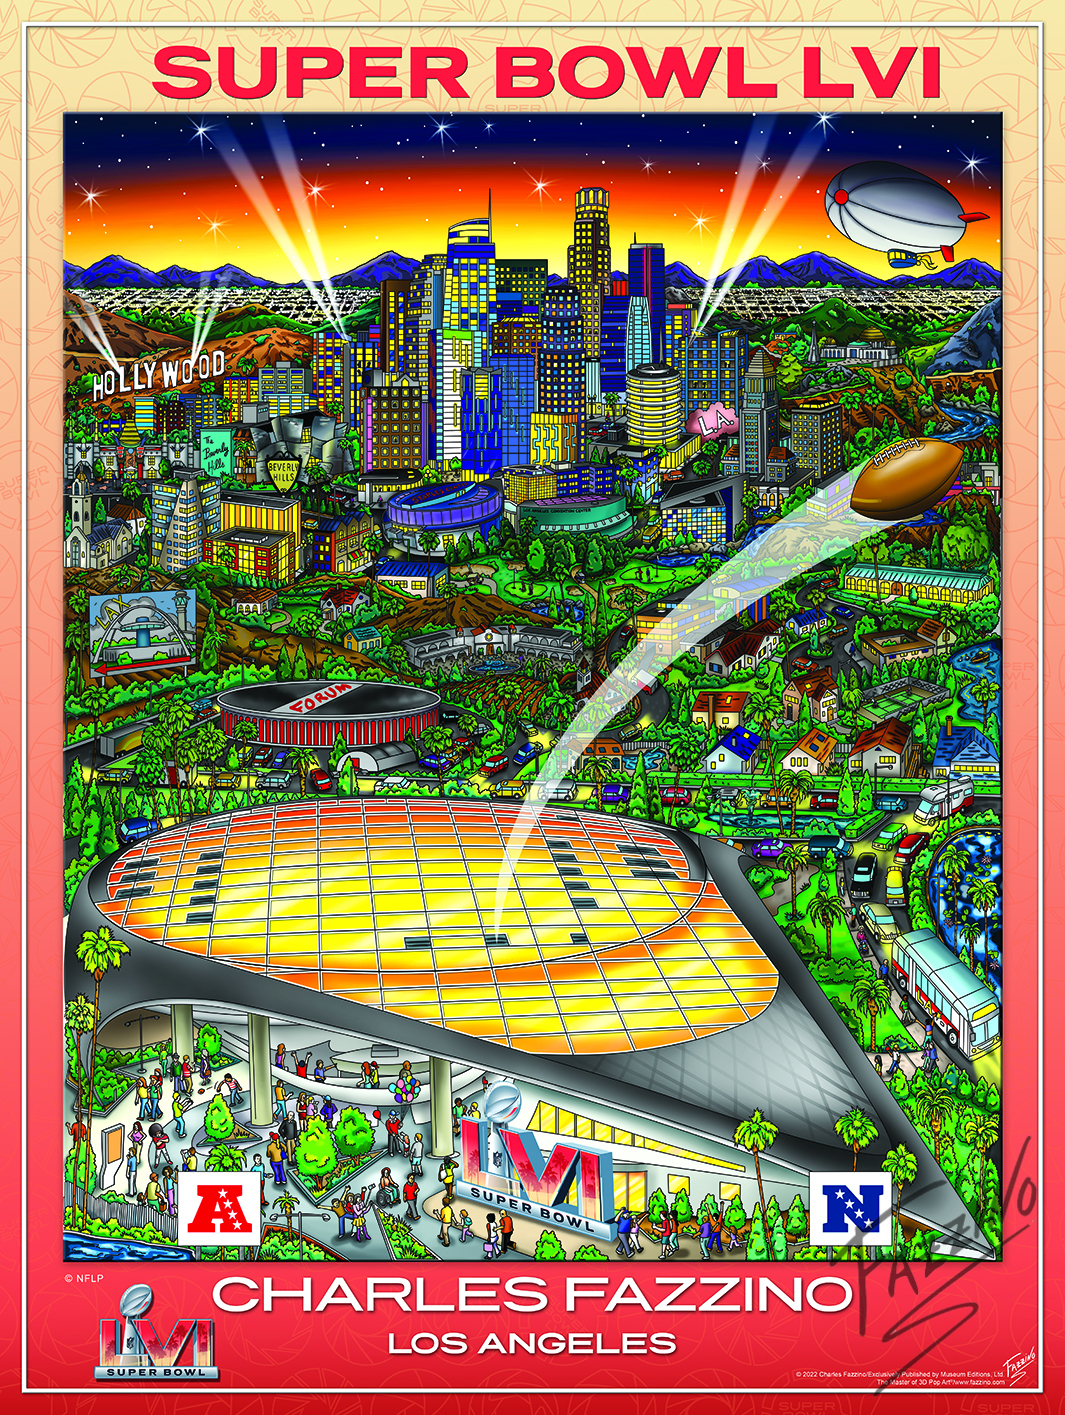 Poster ofFazzino's Super Bowl LVI artwork with Los Angeles cityscape and a football shooting out of the stadium